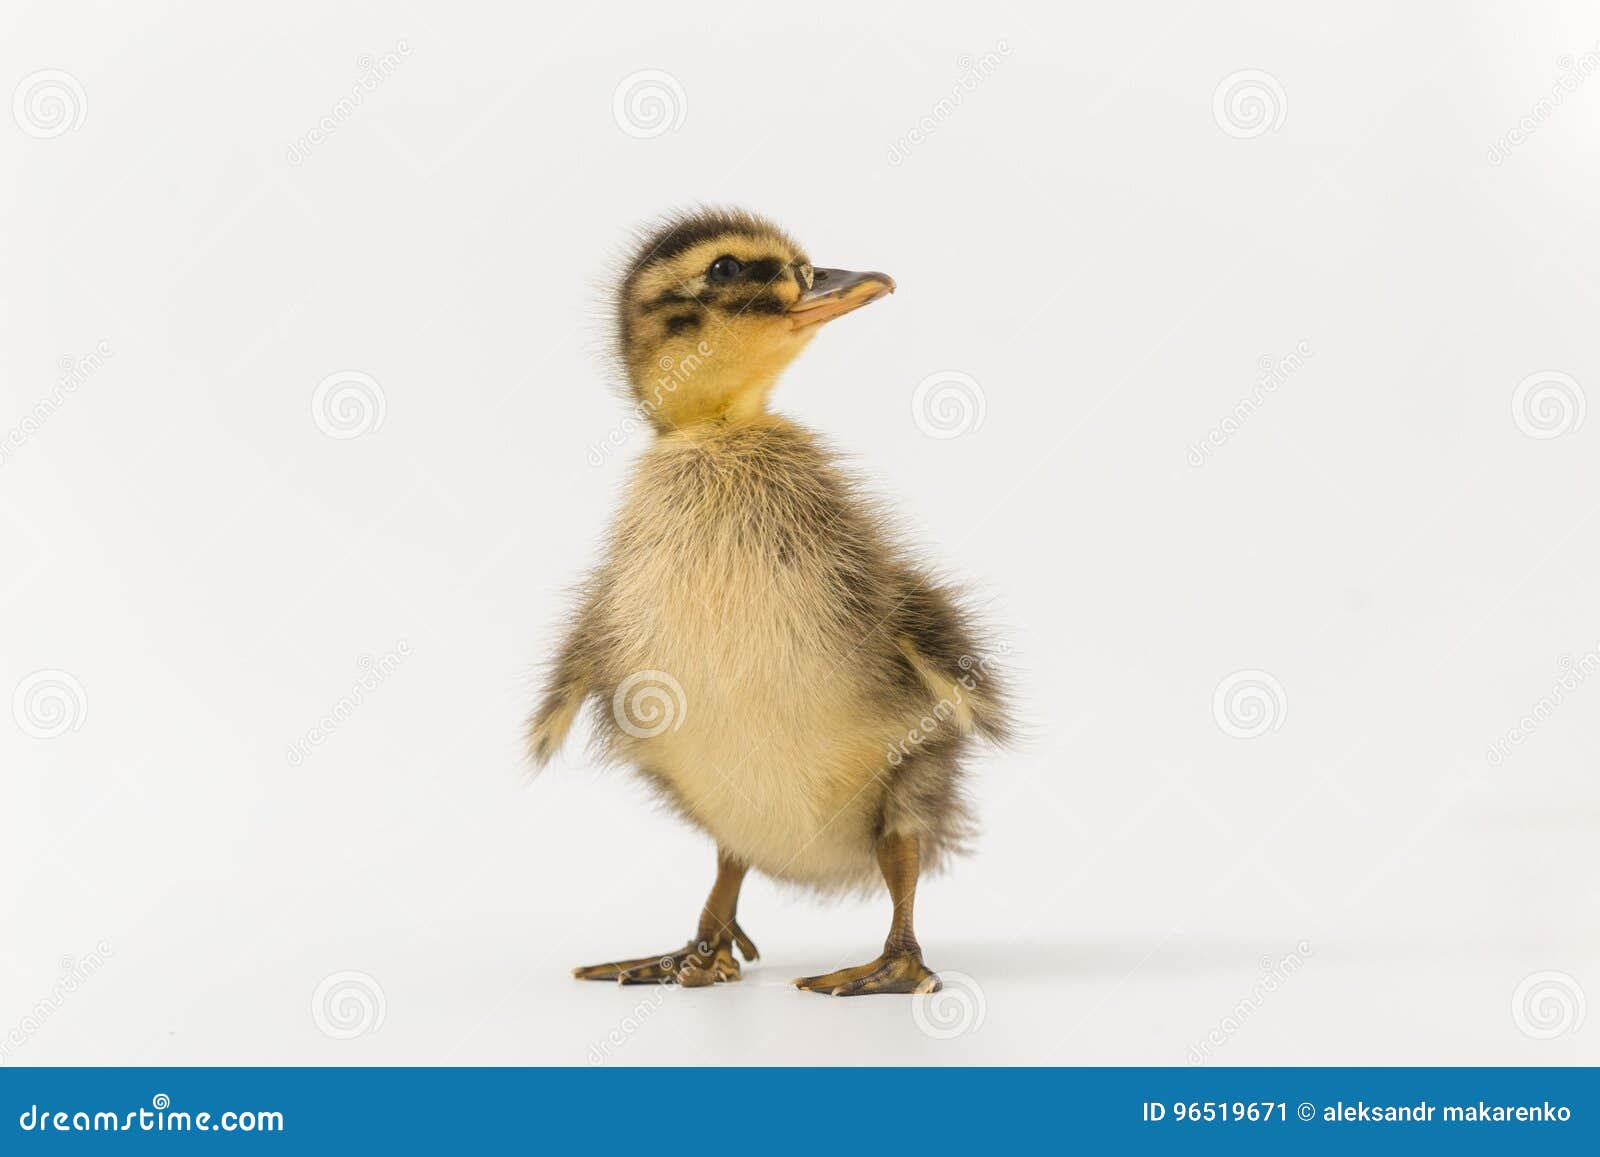 funny duckling of a wild duck on a white background